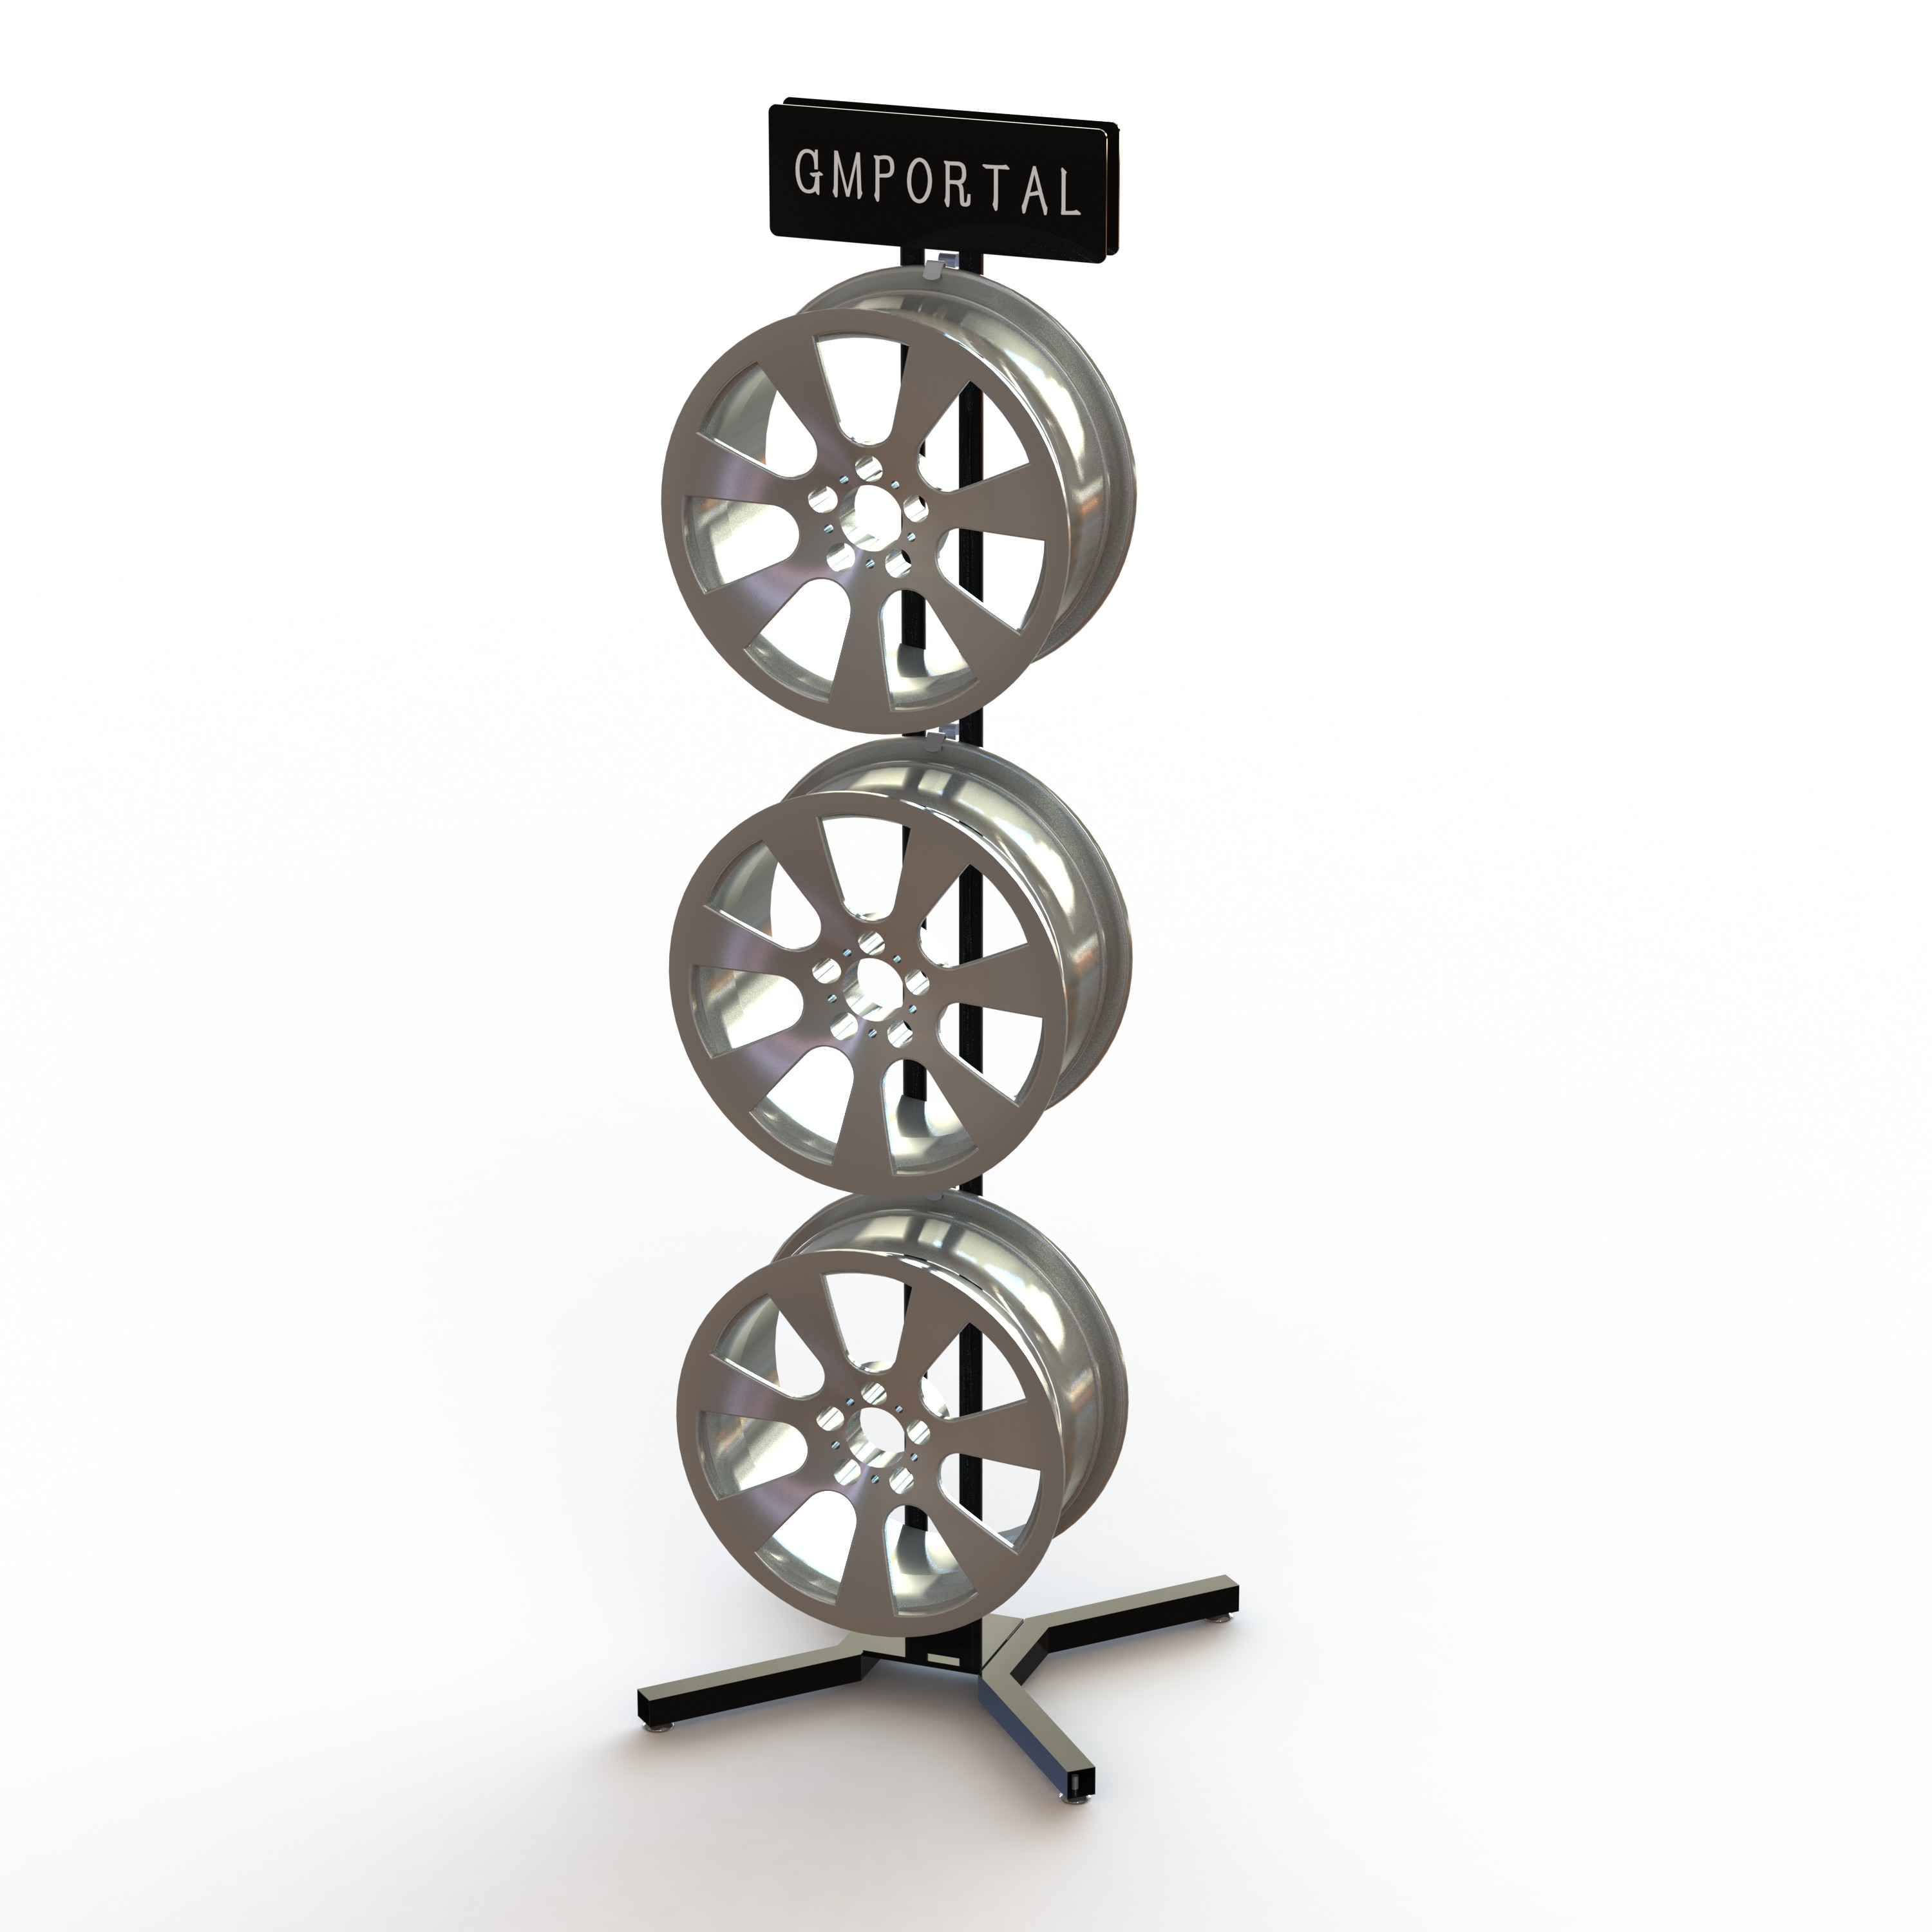  Six Wheels Auto Body Parts Racks , 2 Sides Metal Mag Wheel Display Stand Manufactures